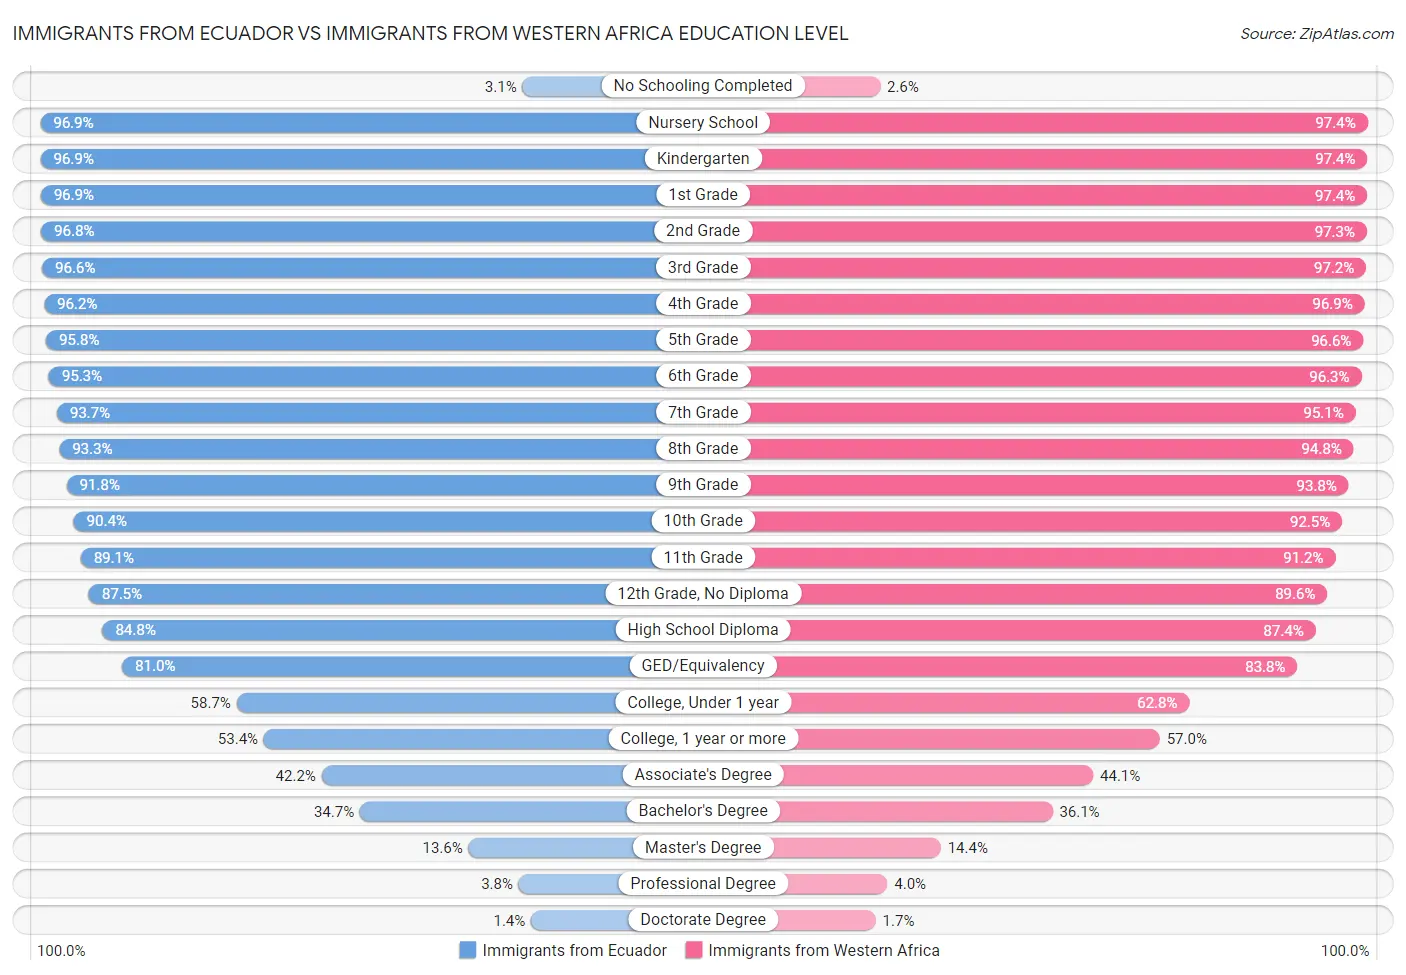 Immigrants from Ecuador vs Immigrants from Western Africa Education Level